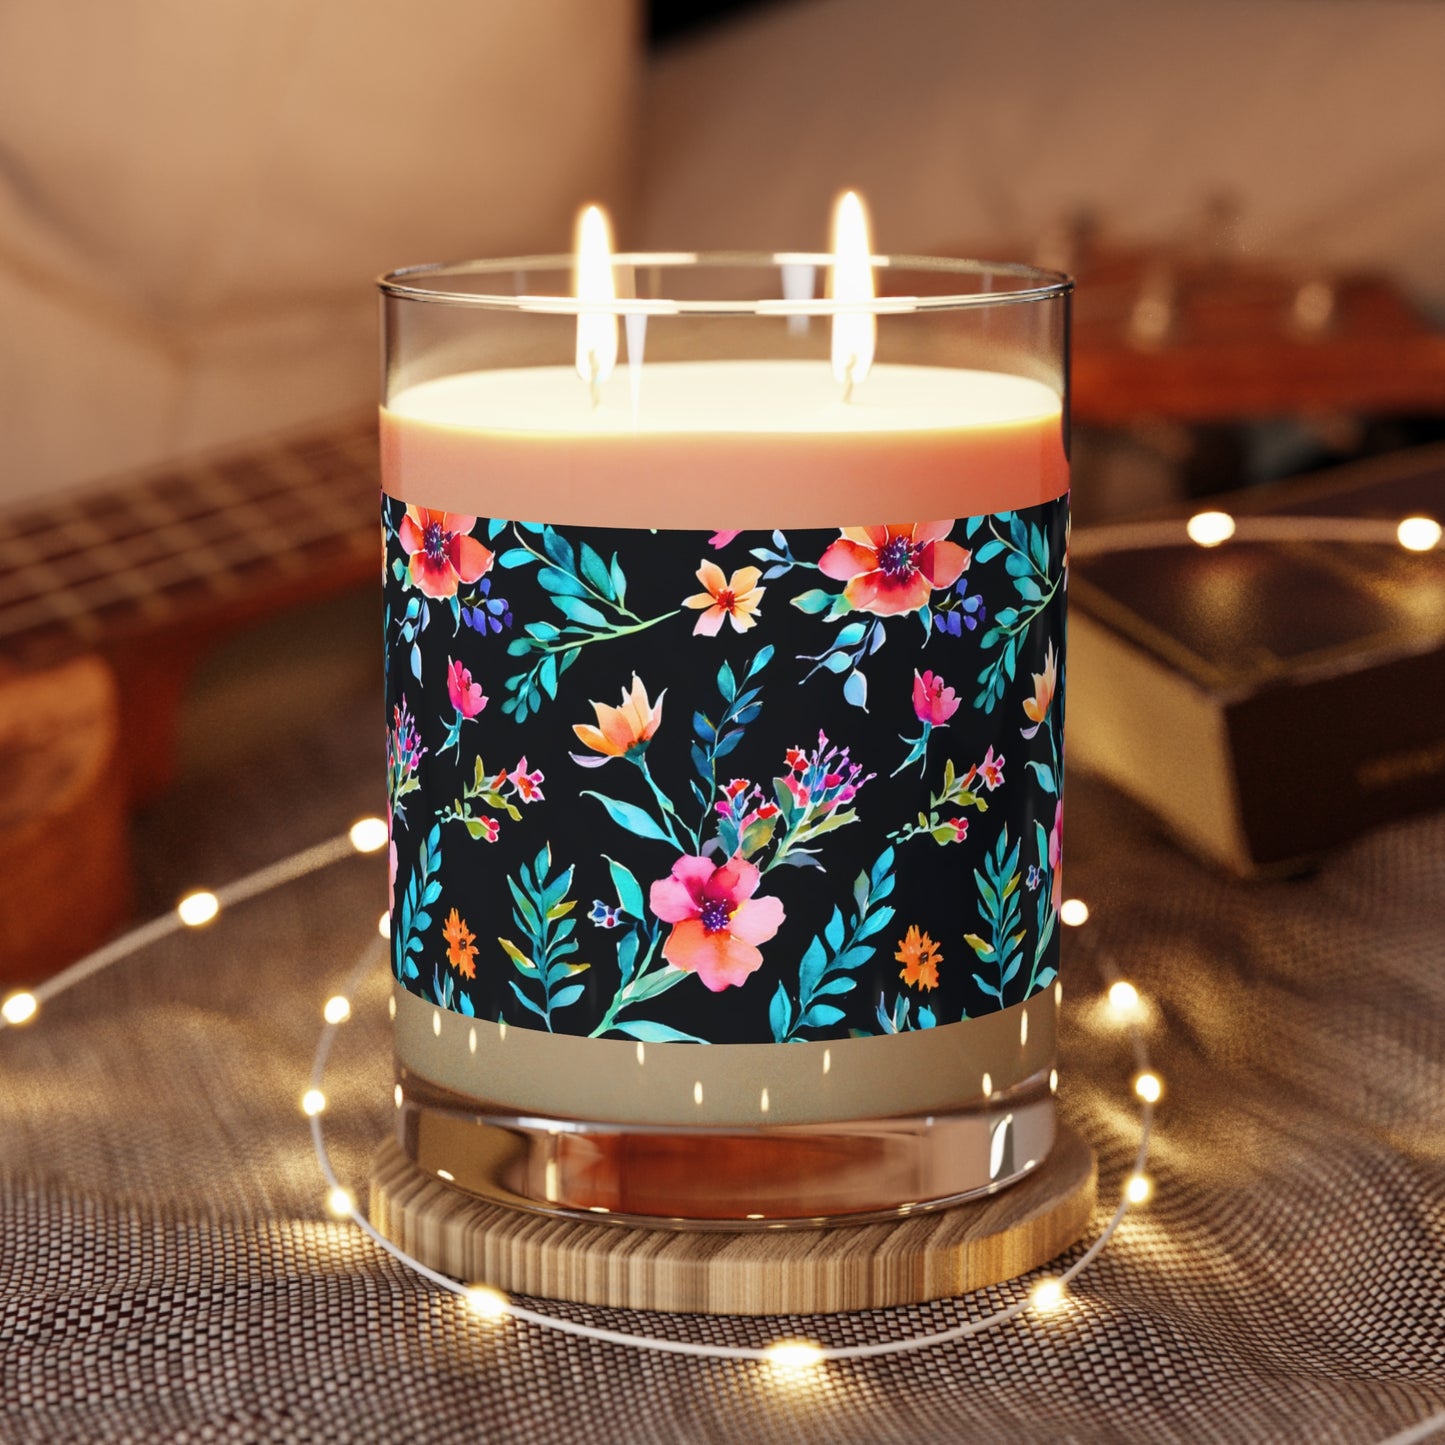 Midnight Floral II Watercolor Aromatherapy Essential Oils Natural Scented Candle - Full Glass, 11oz